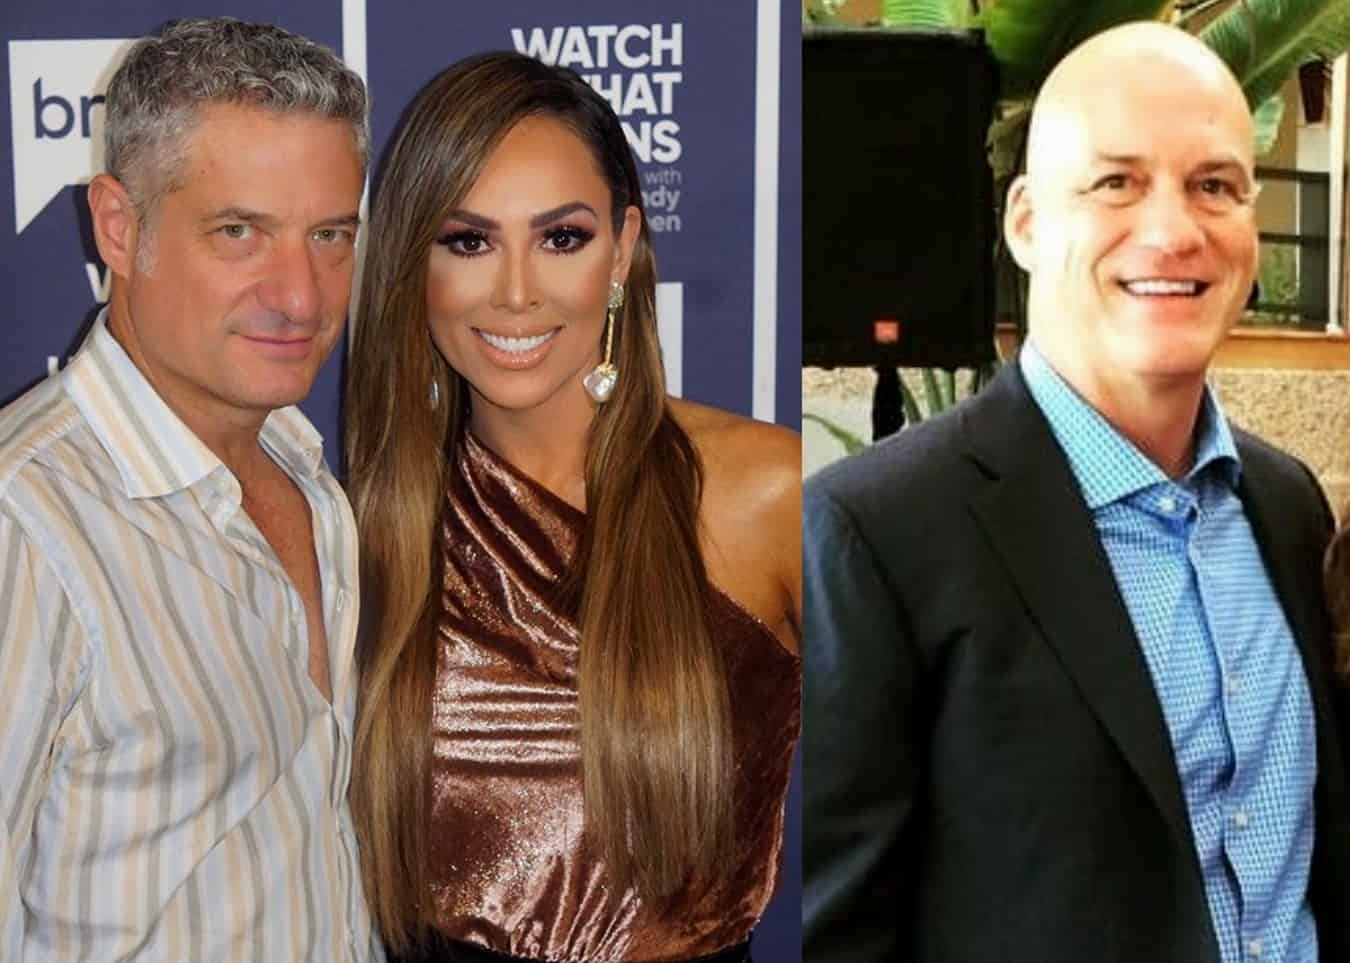 RHOC's Kelly Dodd Slams Ex-Husband Michael Dodd as a "Deadbeat" Dad and Claims He Hasn't Seen Daughter Jolie for Five Months, Applauds "Real Dad" Rick Leventhal in Deleted Post